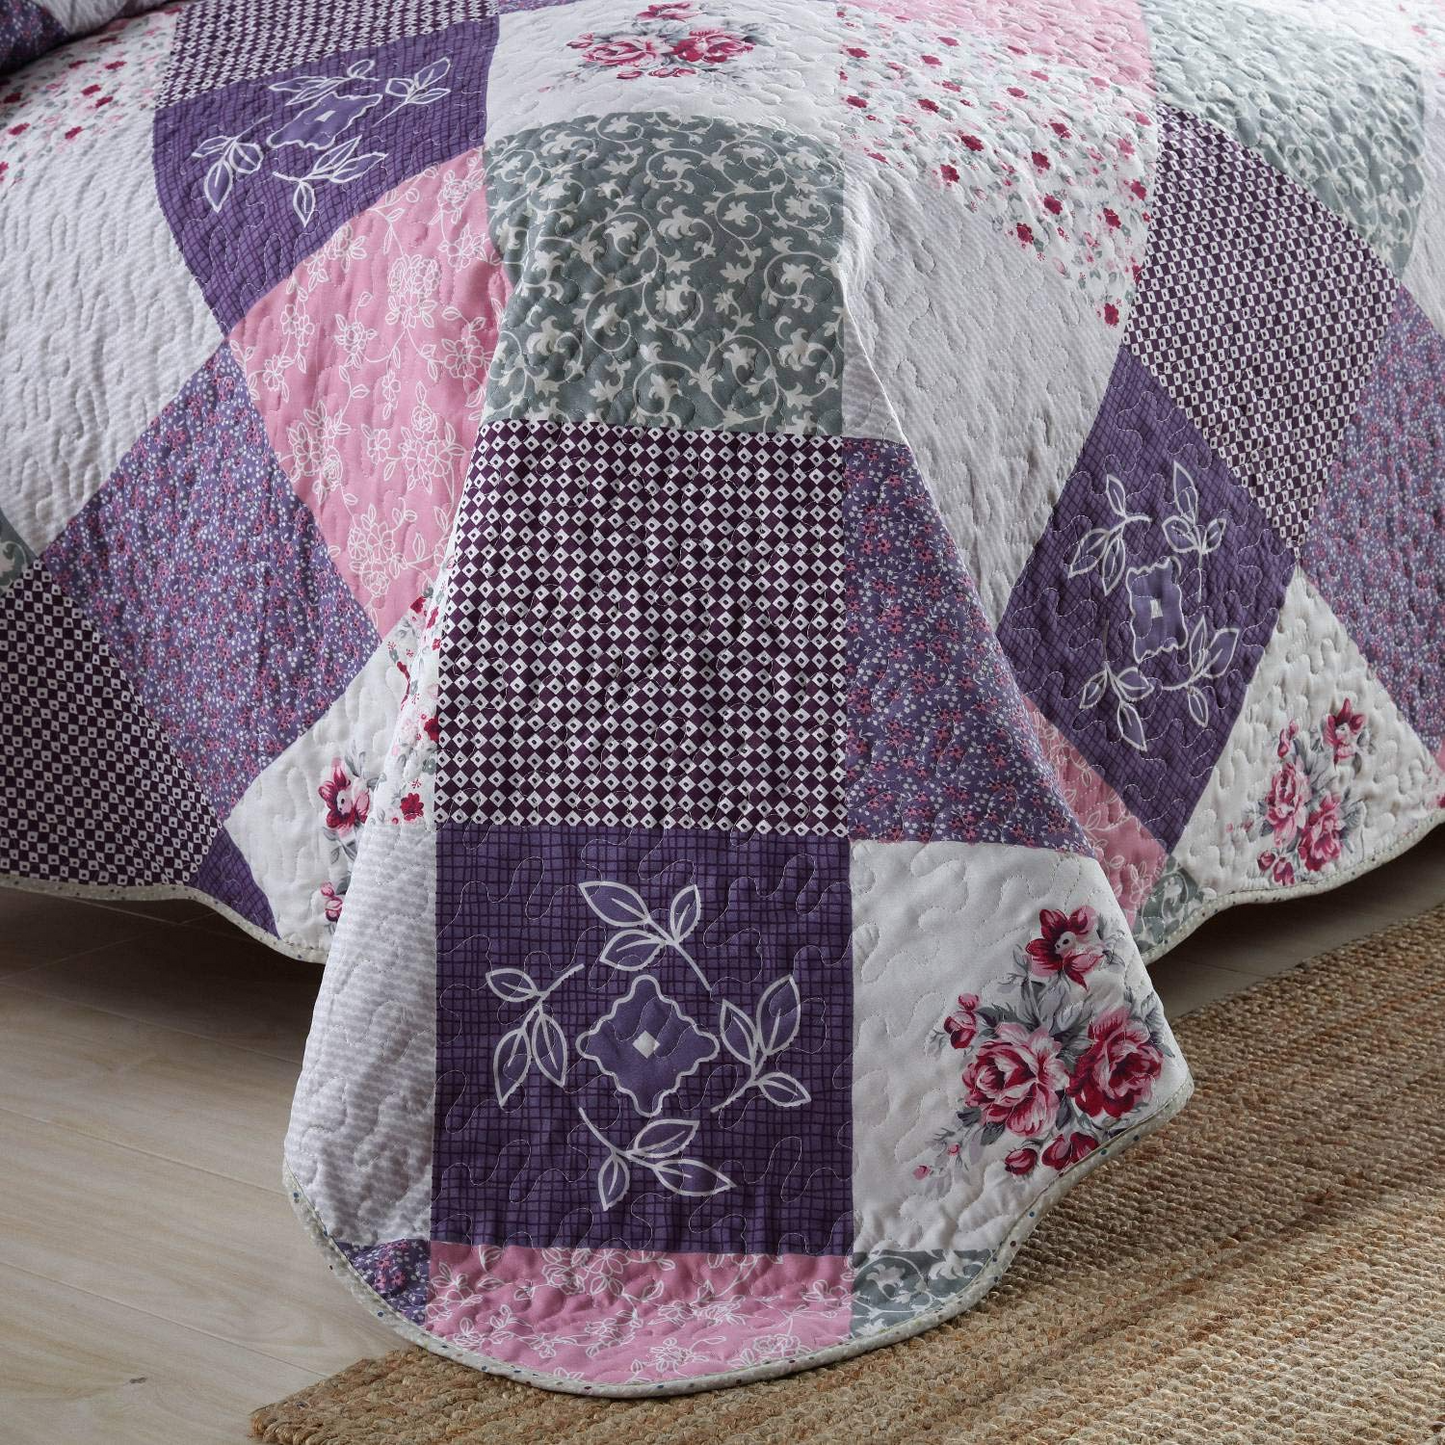 Bohemian Patchwork 3 Pieces Quilt Set With 2 Pillowcases for all seasons